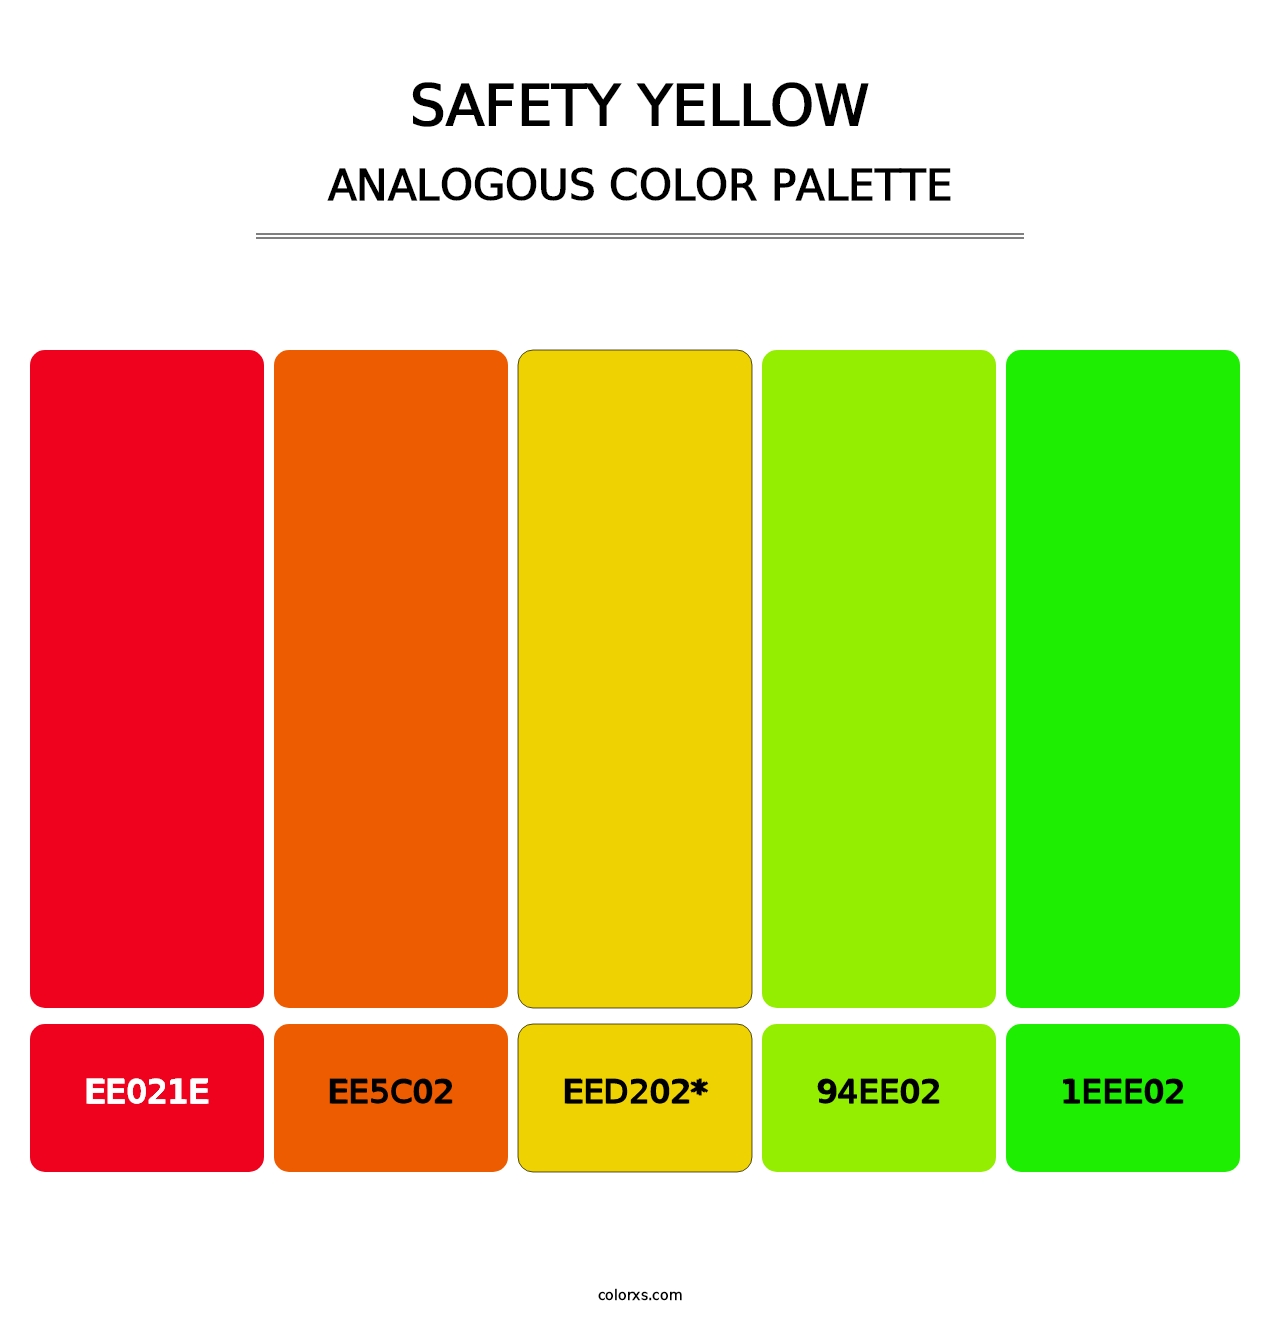 Safety Yellow - Analogous Color Palette